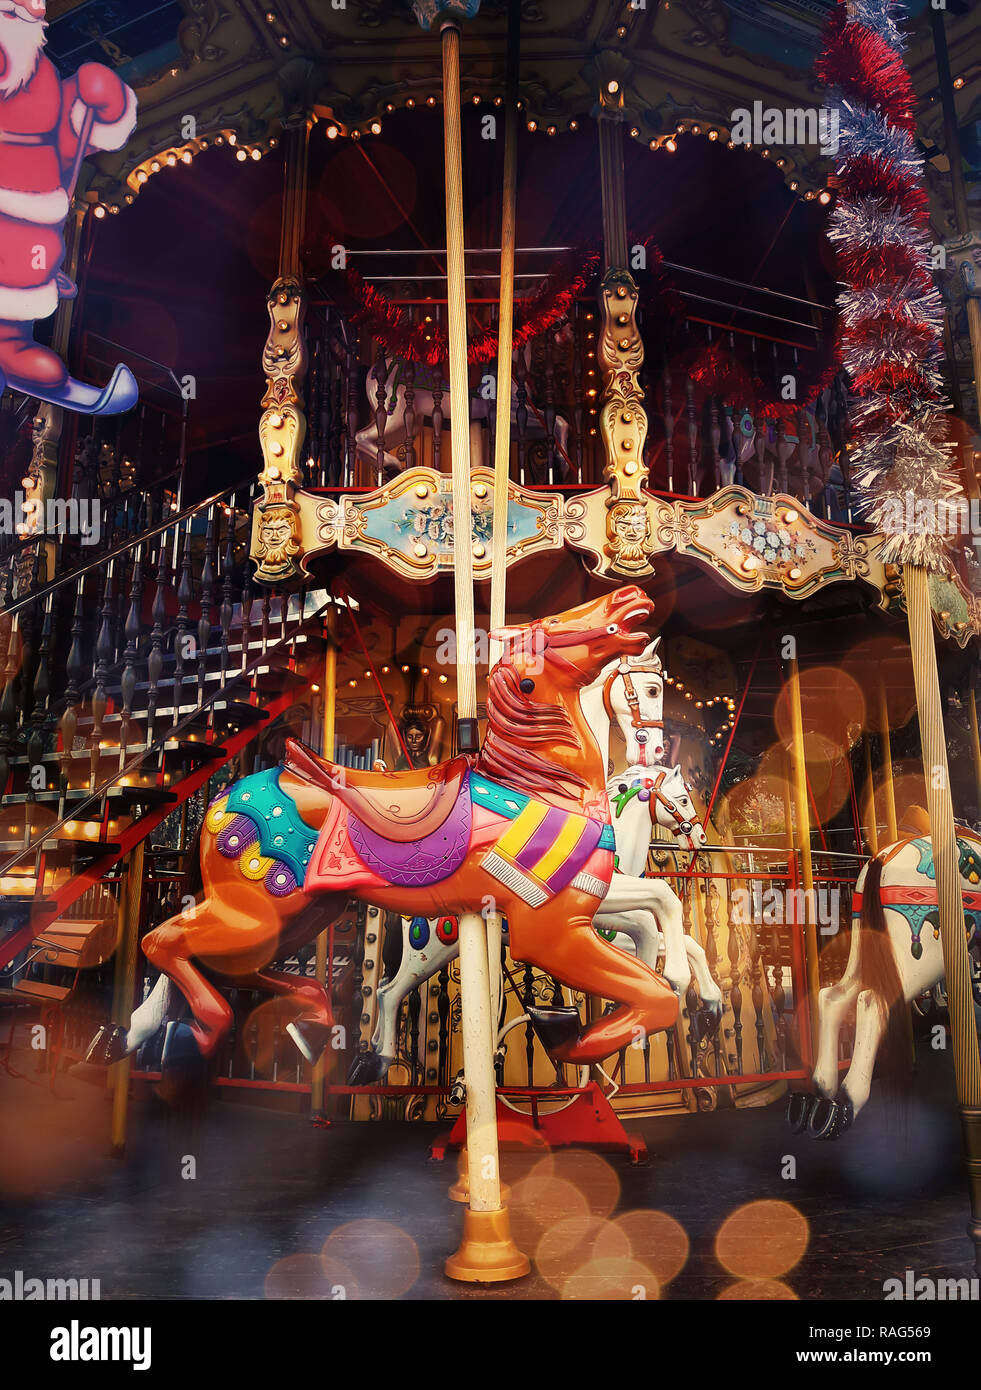 Beautiful bright children carousel in amusement park at night in winter. Close up up running horses silhouettes with vintage Christmas decorations, gl Stock Photo